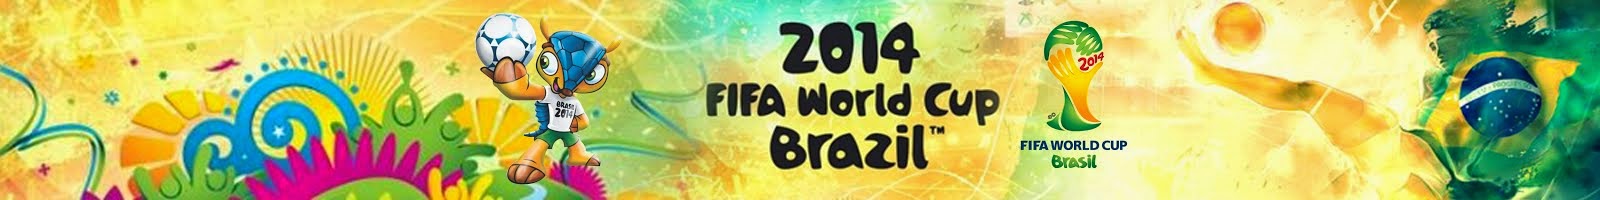 OFFICIAL FIFA WORLD CUP 2014